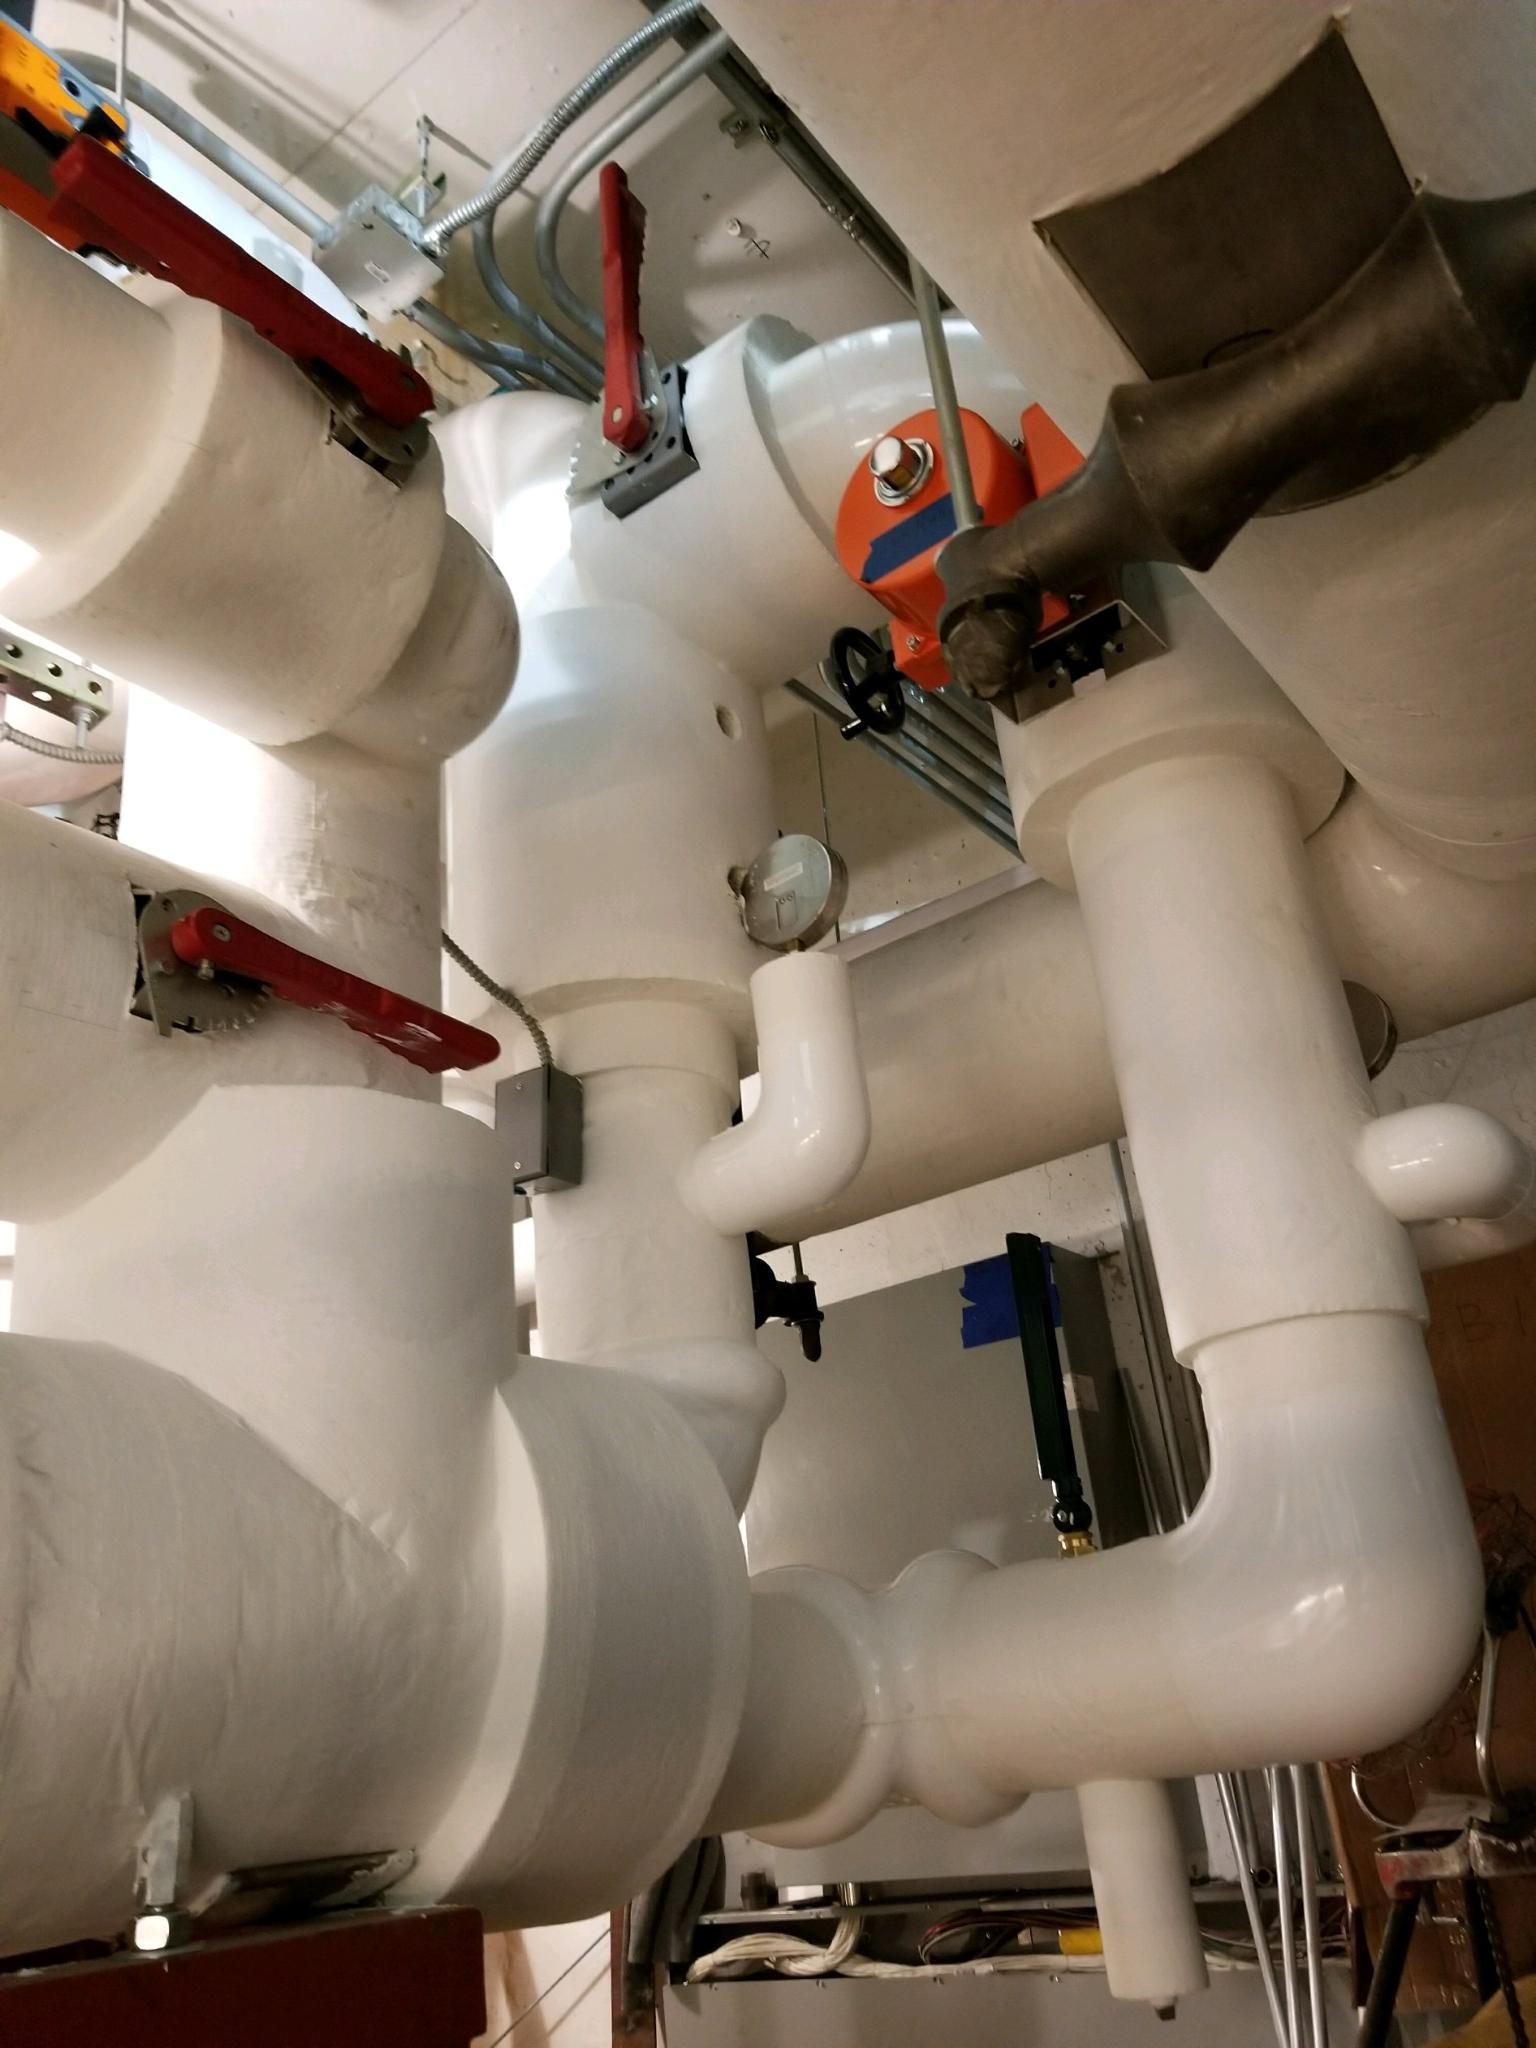 white insulated pipes are lined up in a room